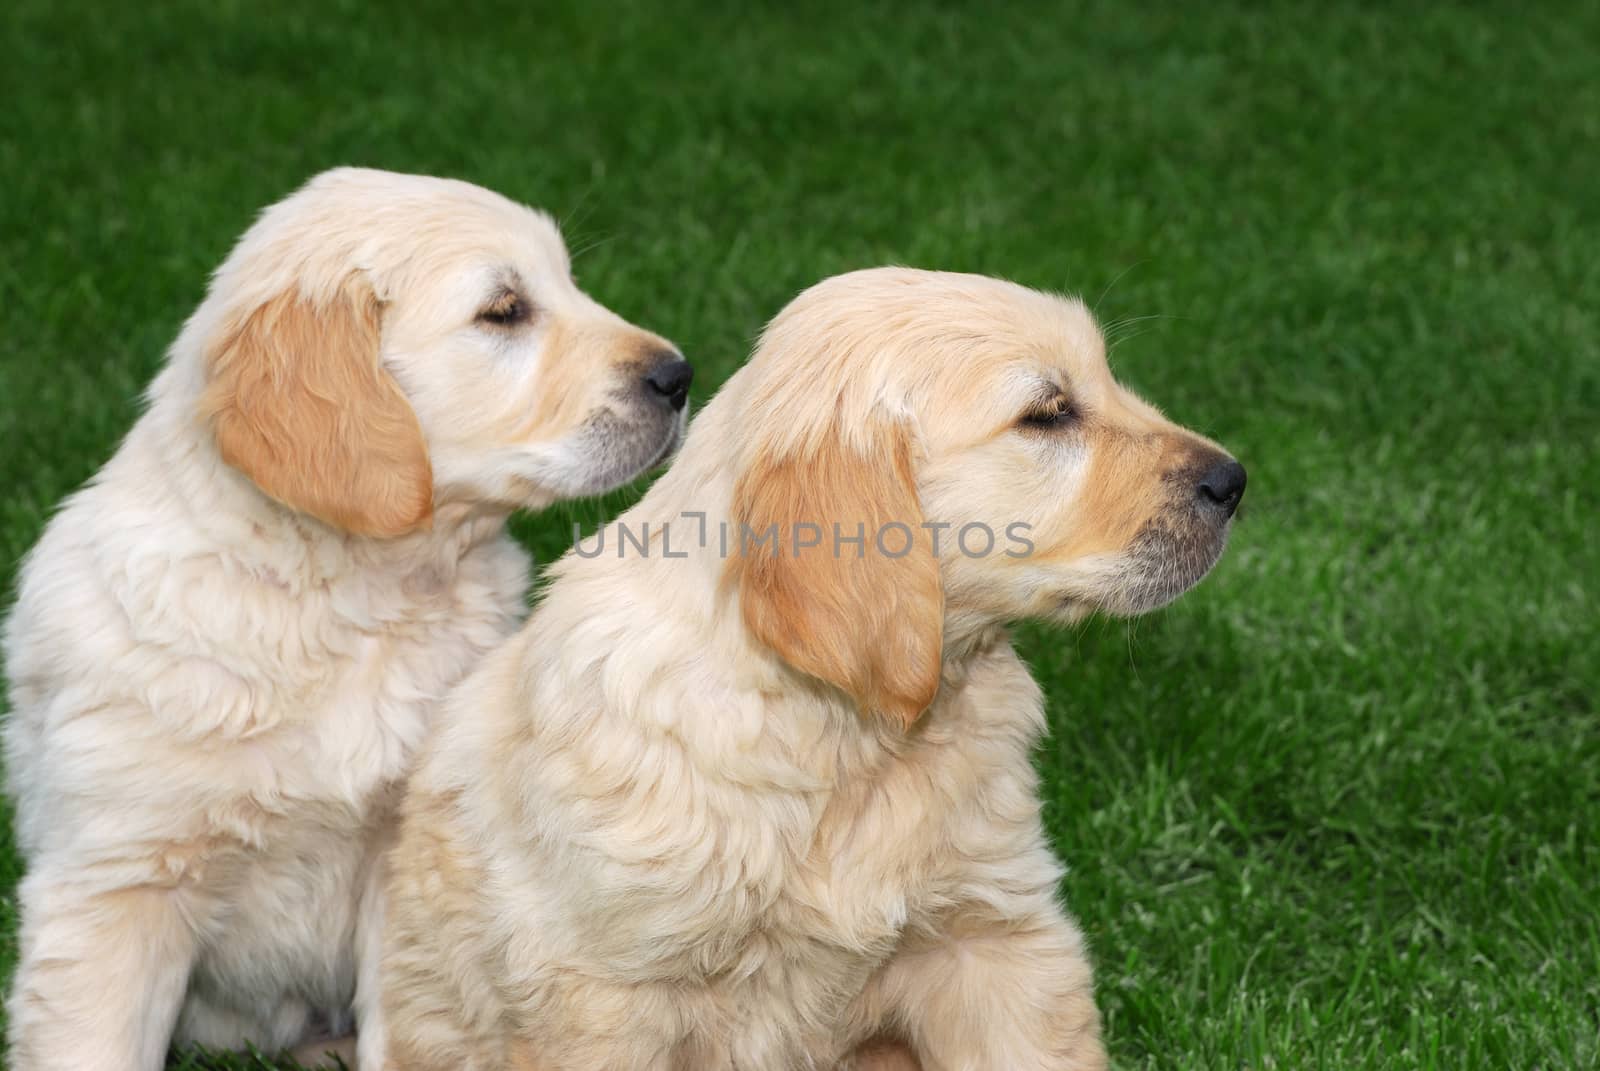 Two golden retriever puppies sitting on a grass.